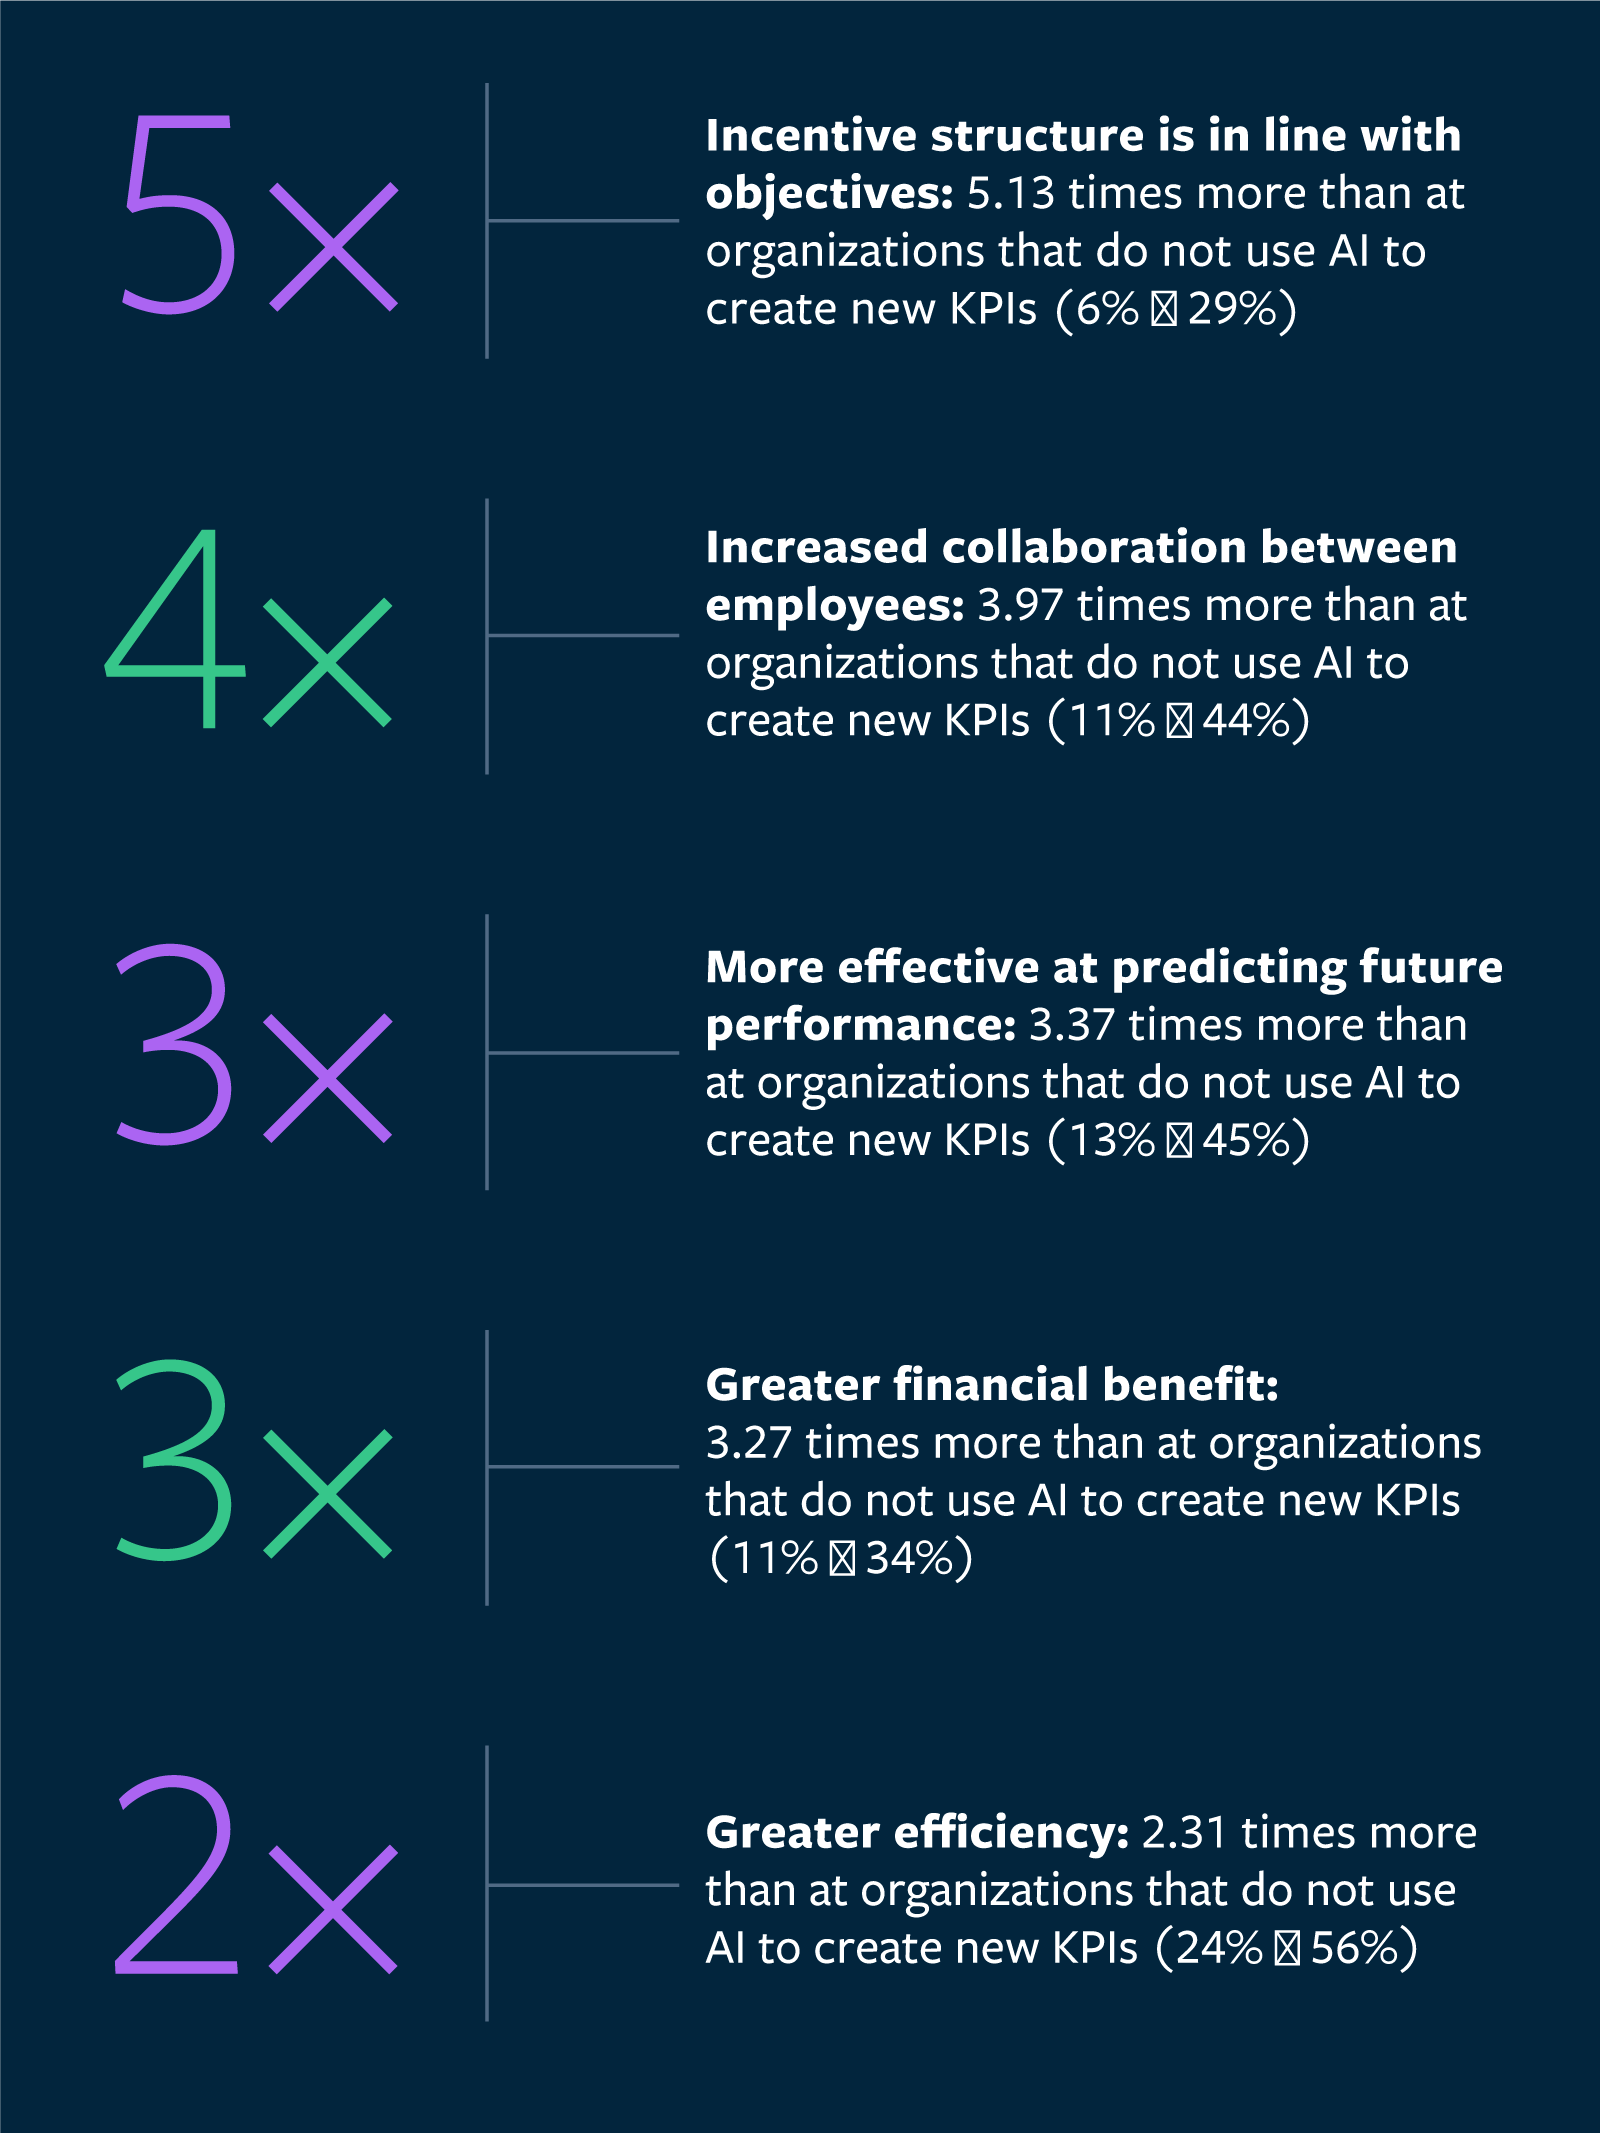 Benefits From AI-Adjusted KPIs